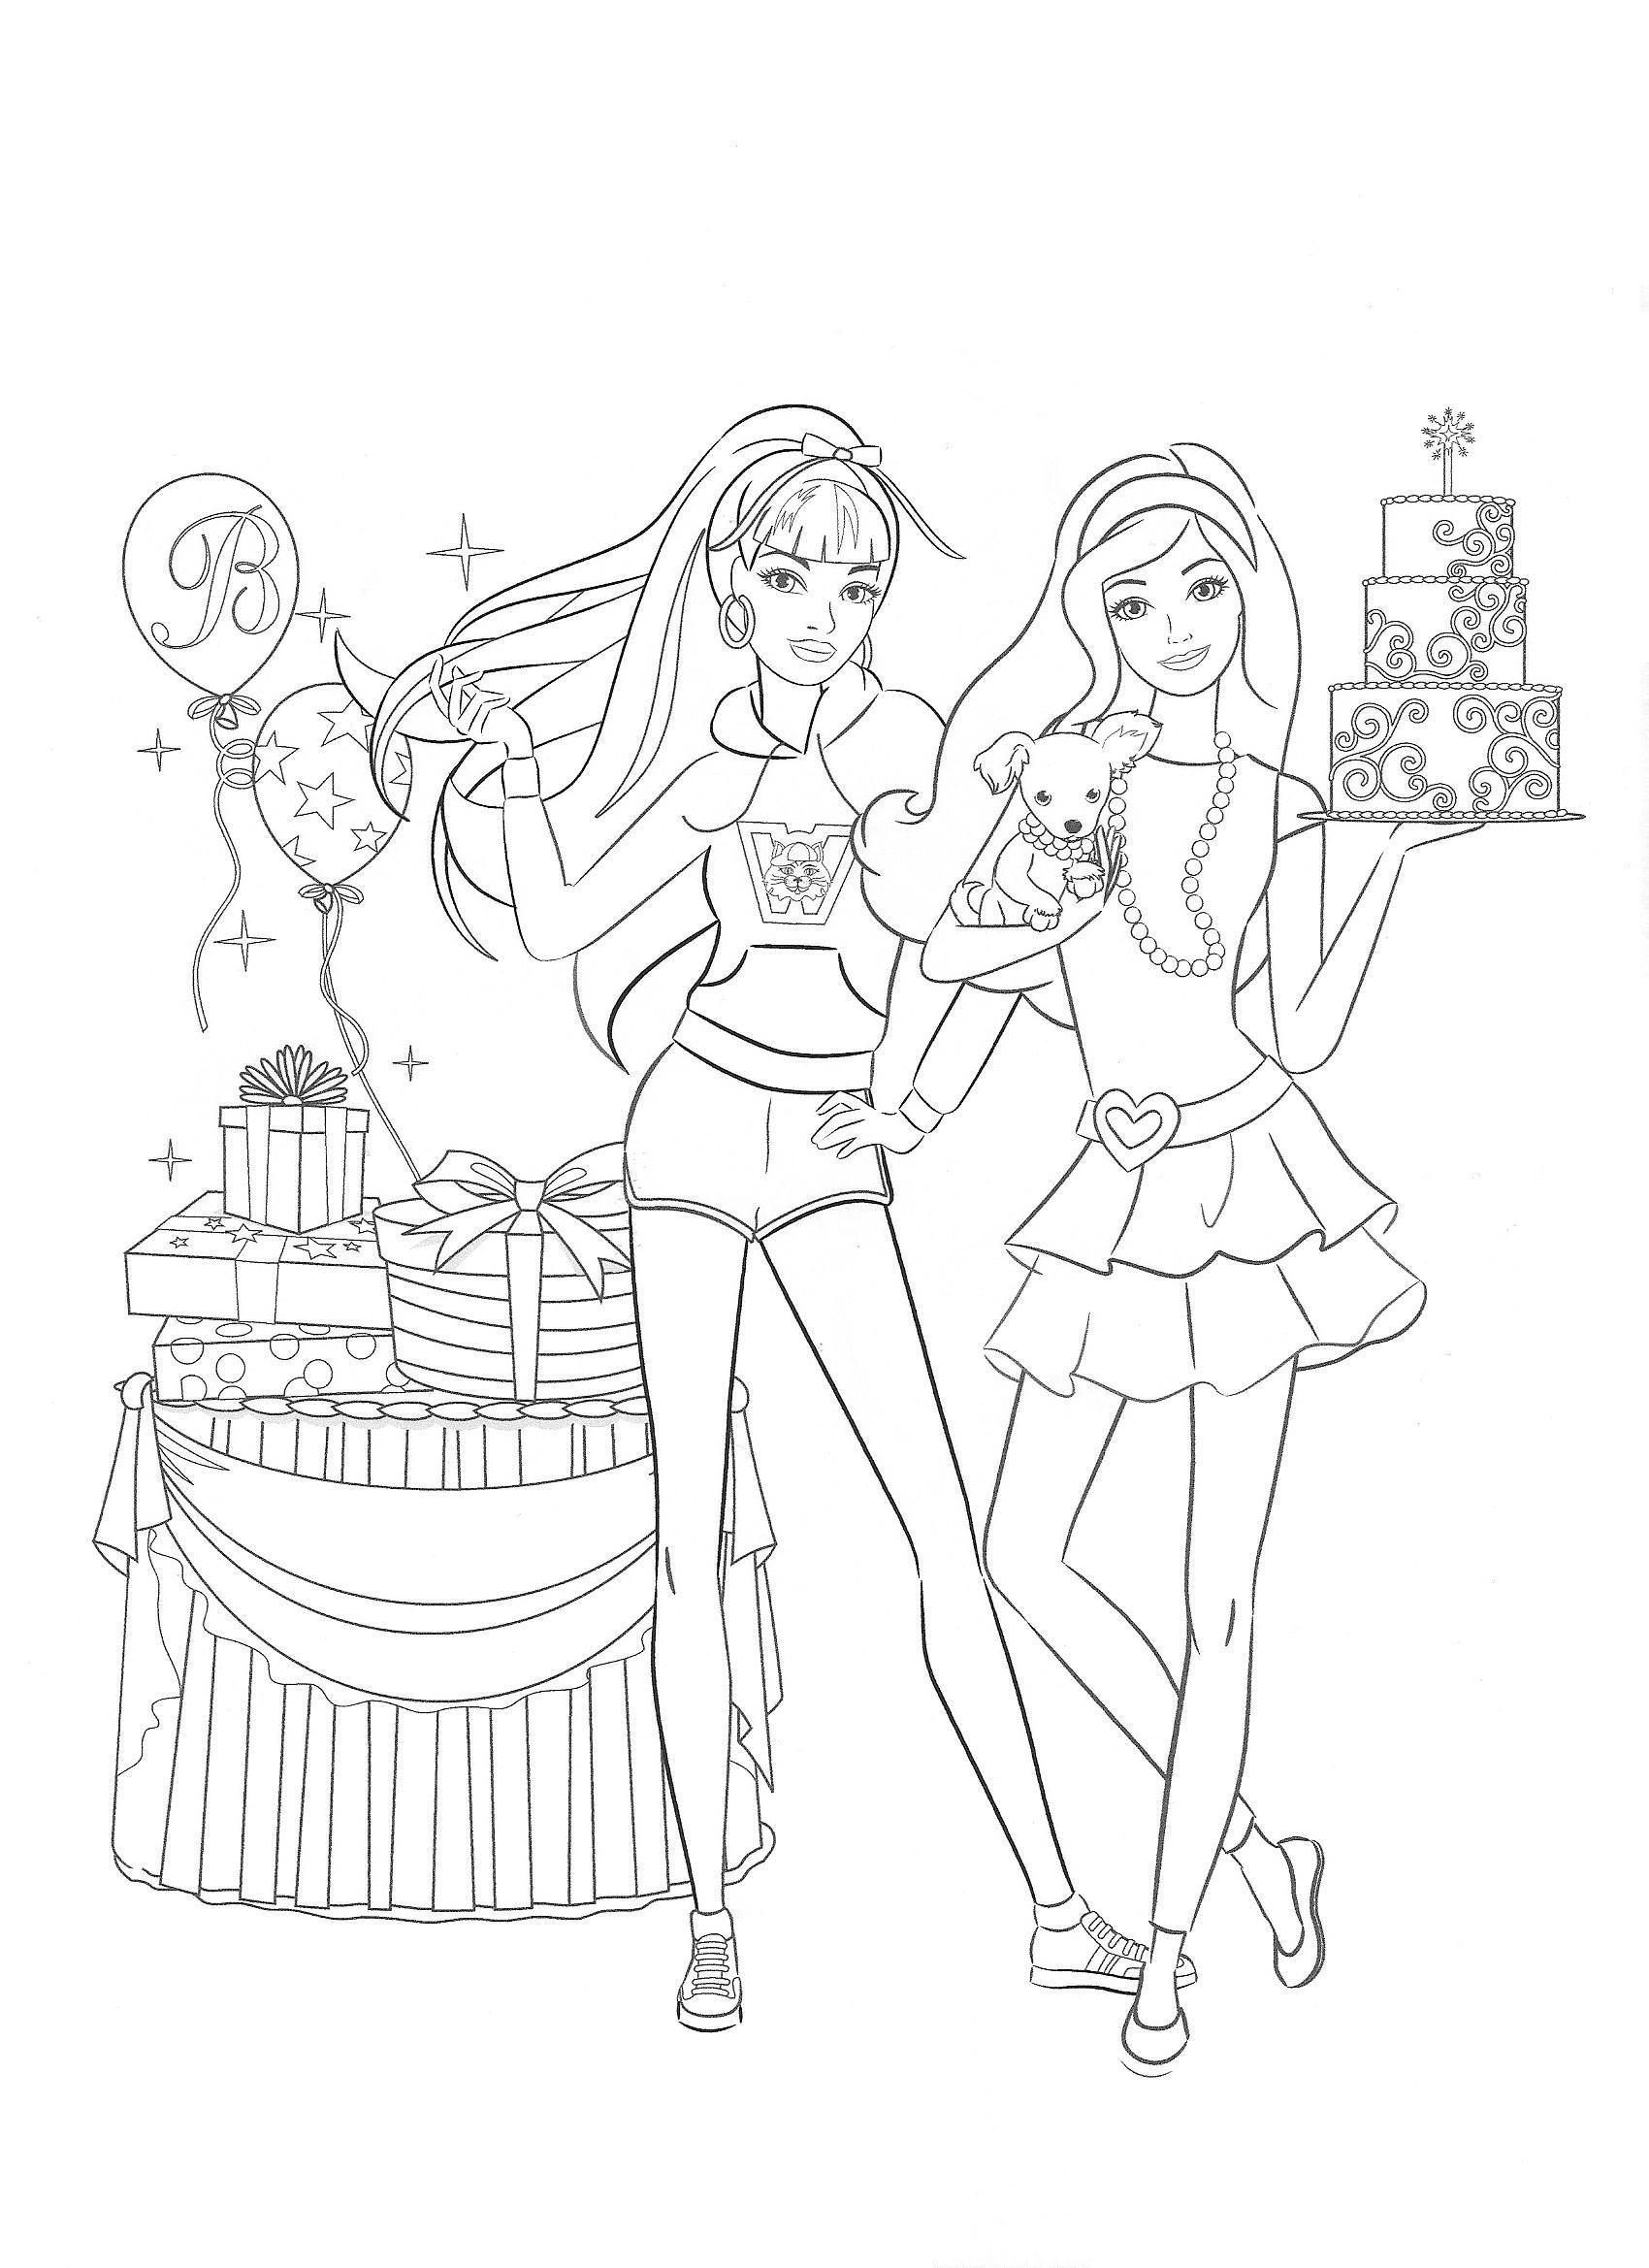 Barbie Movie Coloring Pages   Coloring Pages For All Ages ...